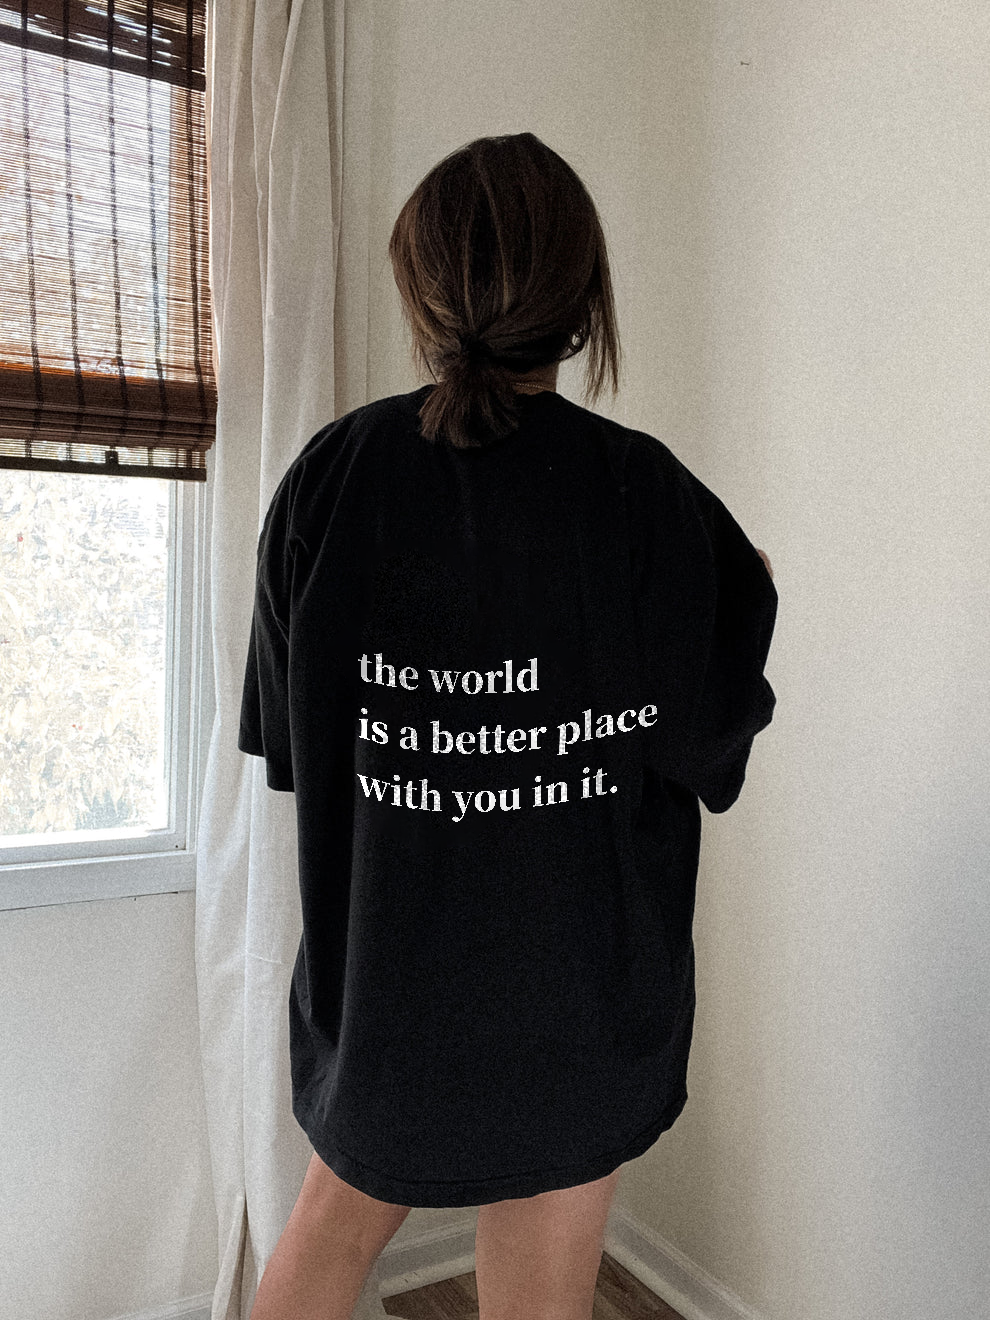 The World is a better place Printed Oversized Unisex T-shirt